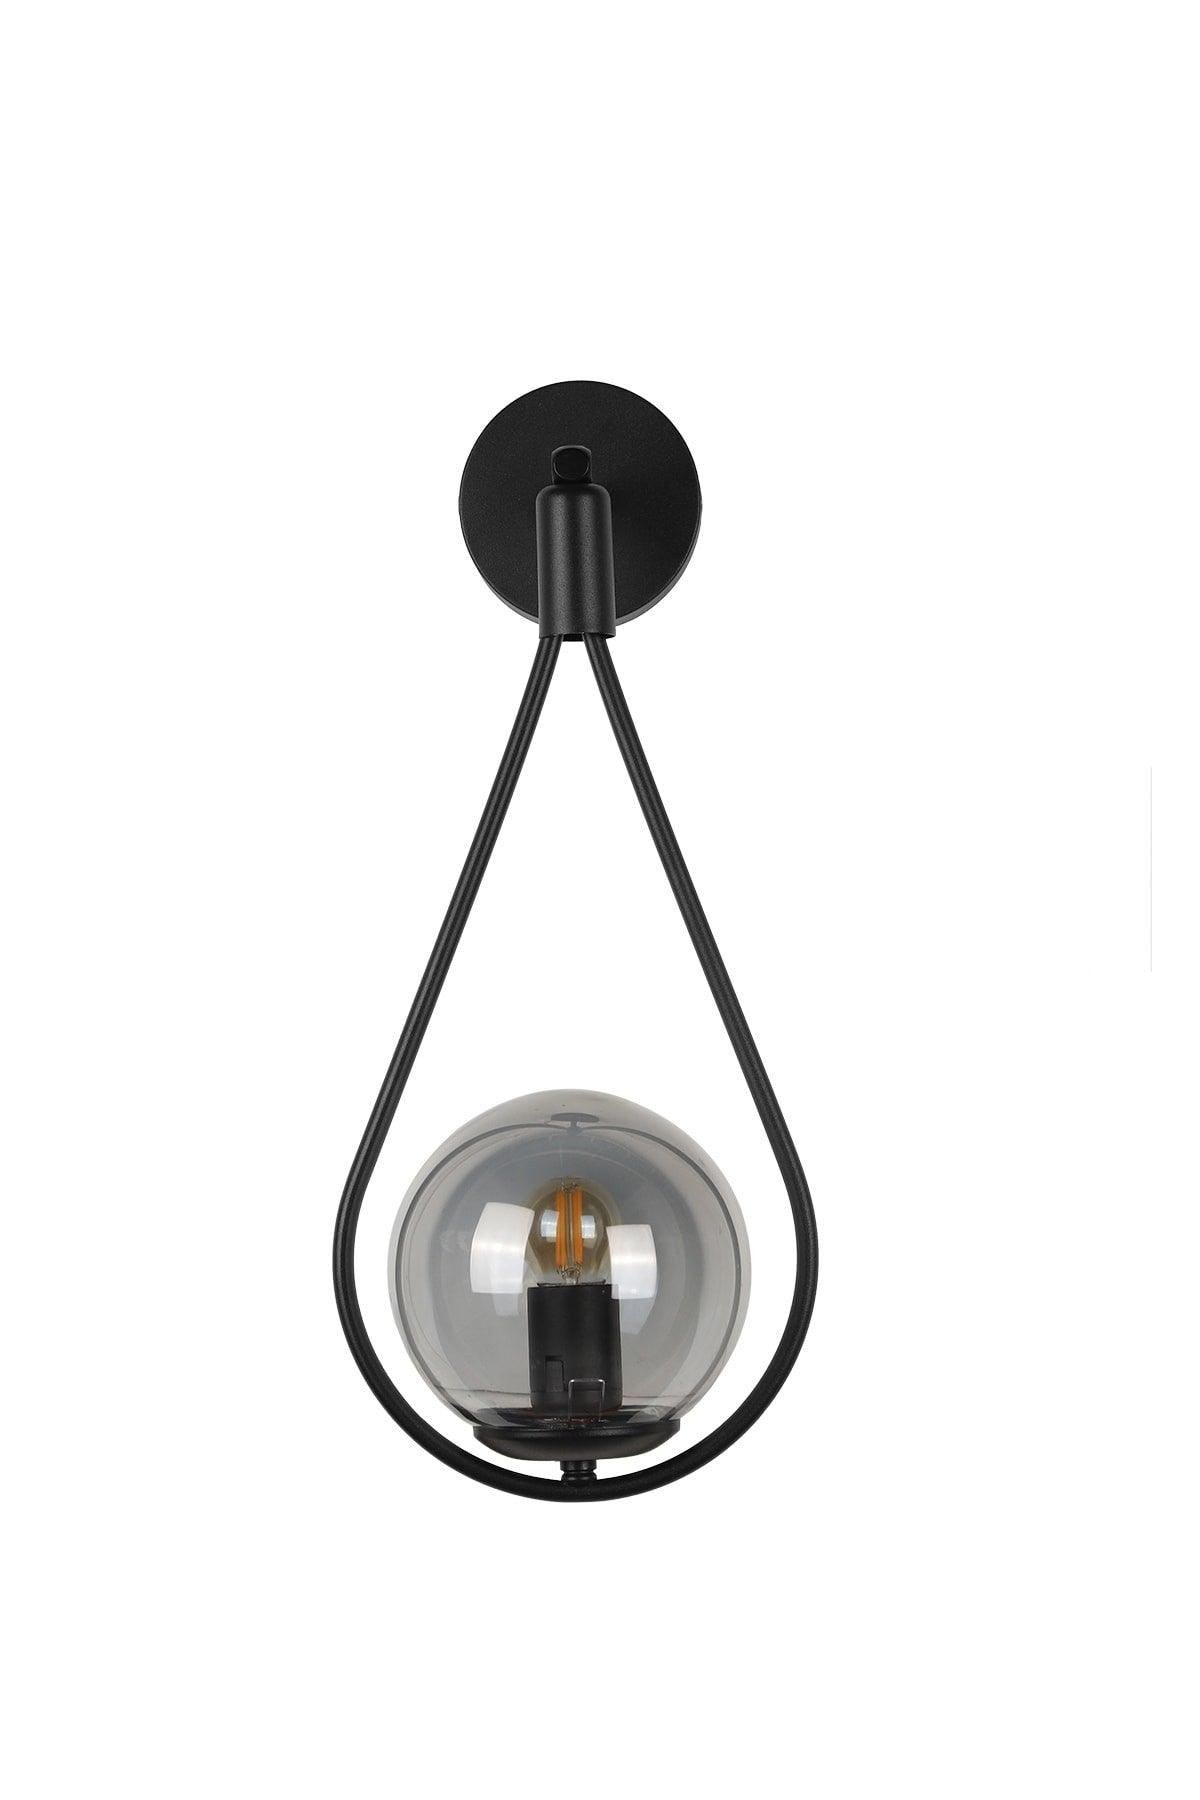 Mexican Sconce Black Smoked Glass - Swordslife